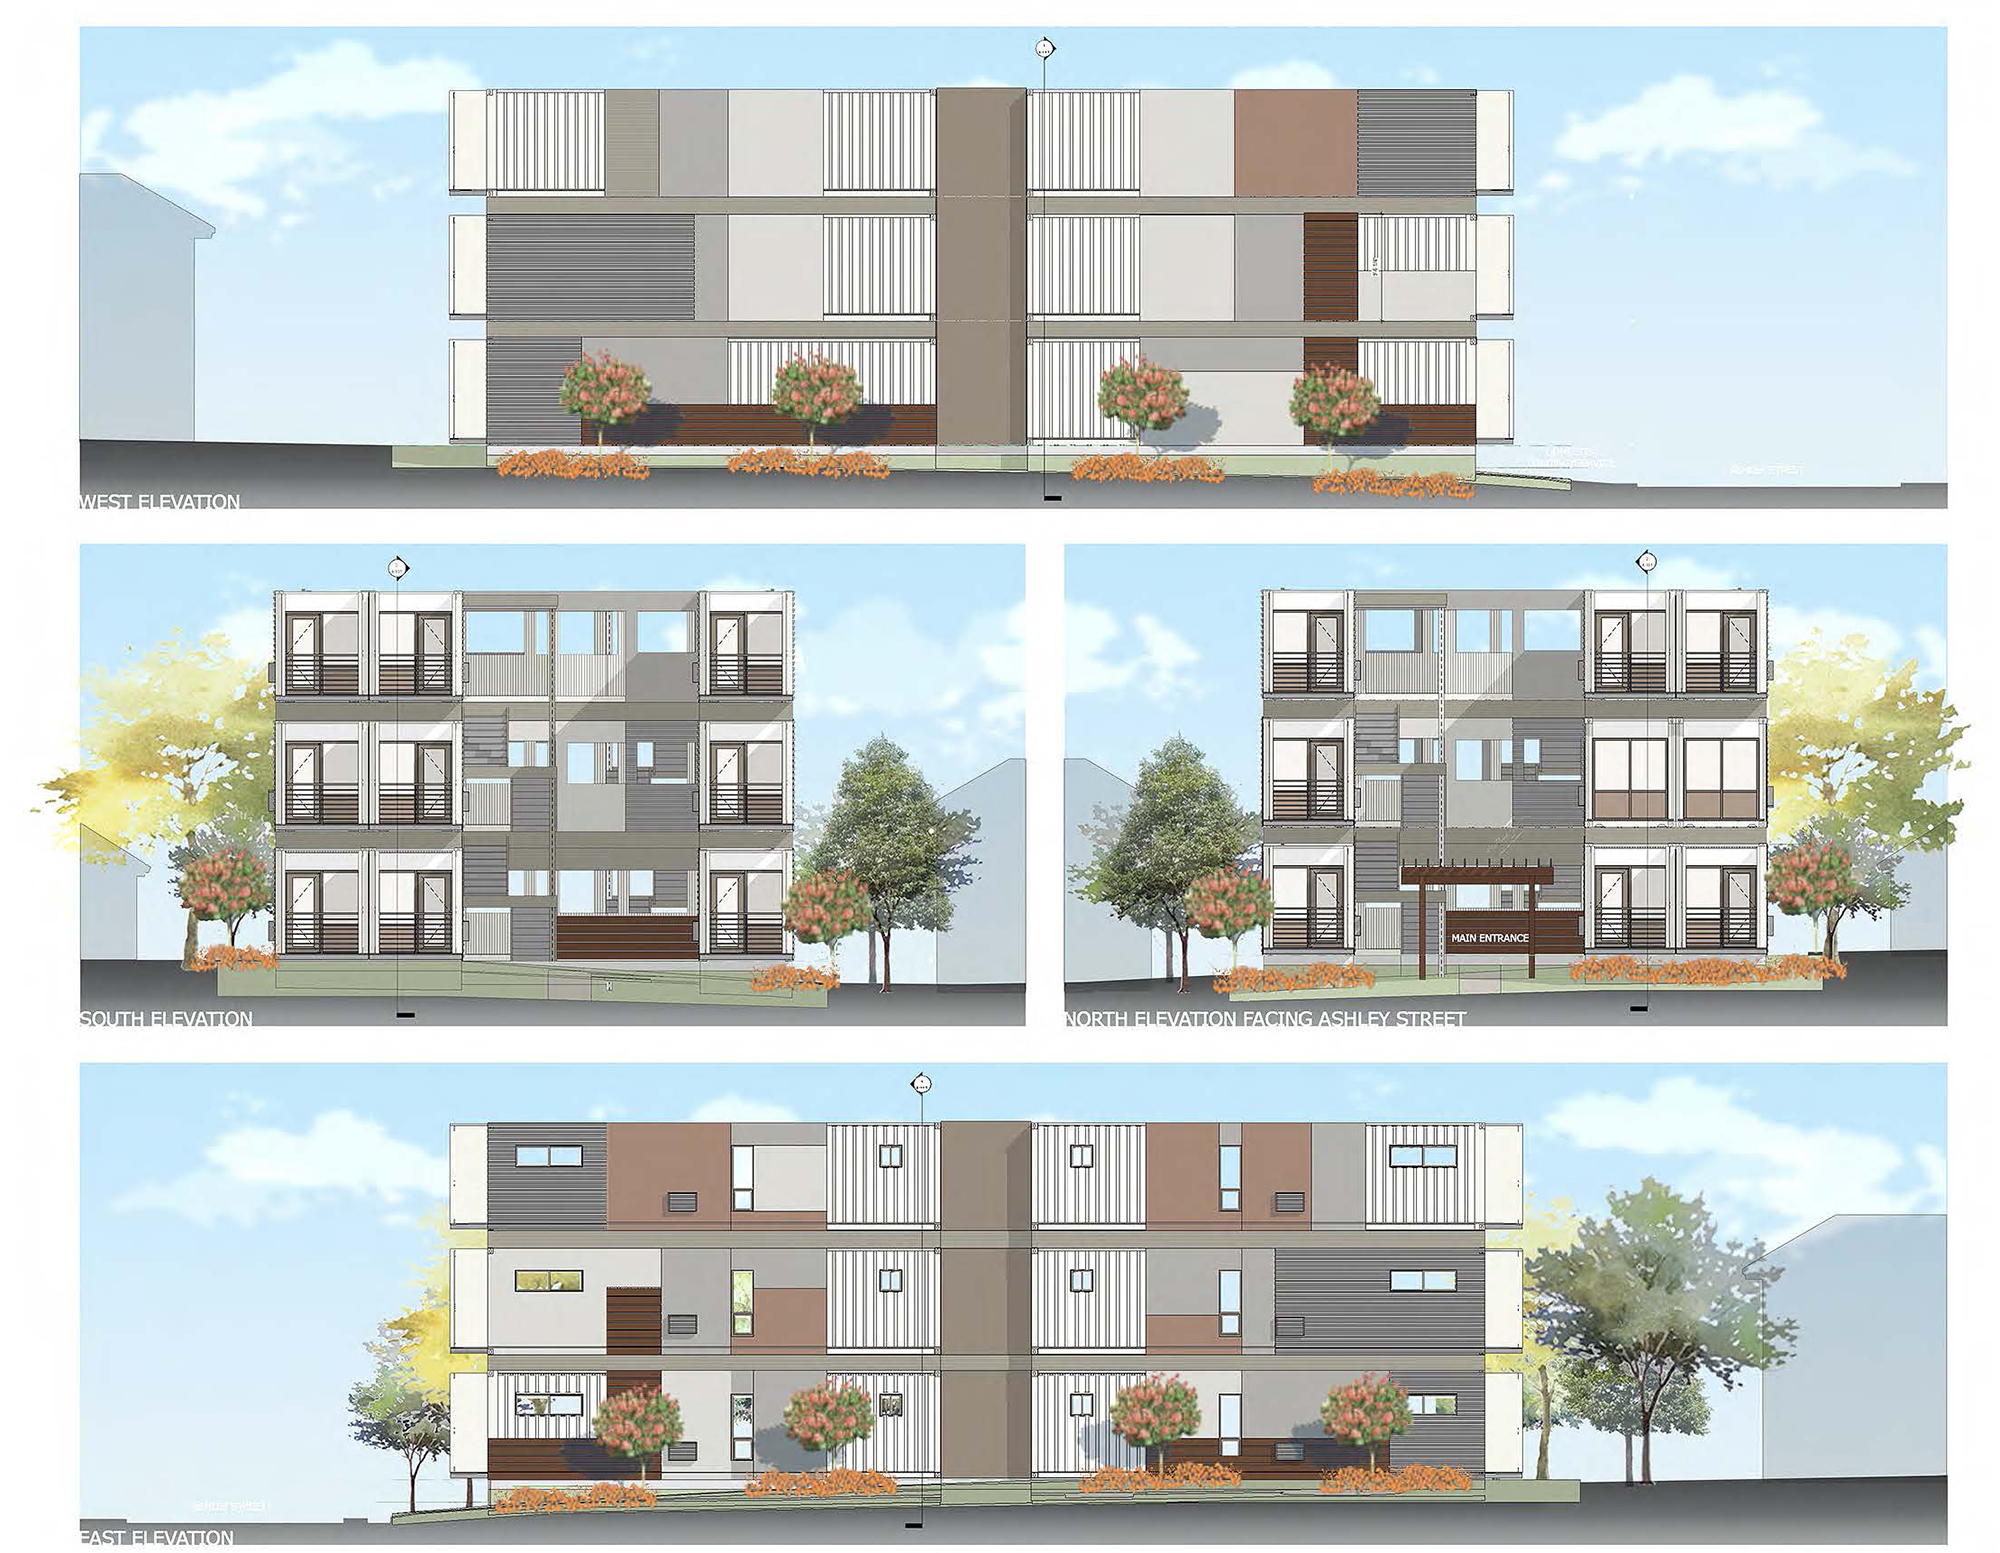 Elevations of the Ashley Street Container Project.